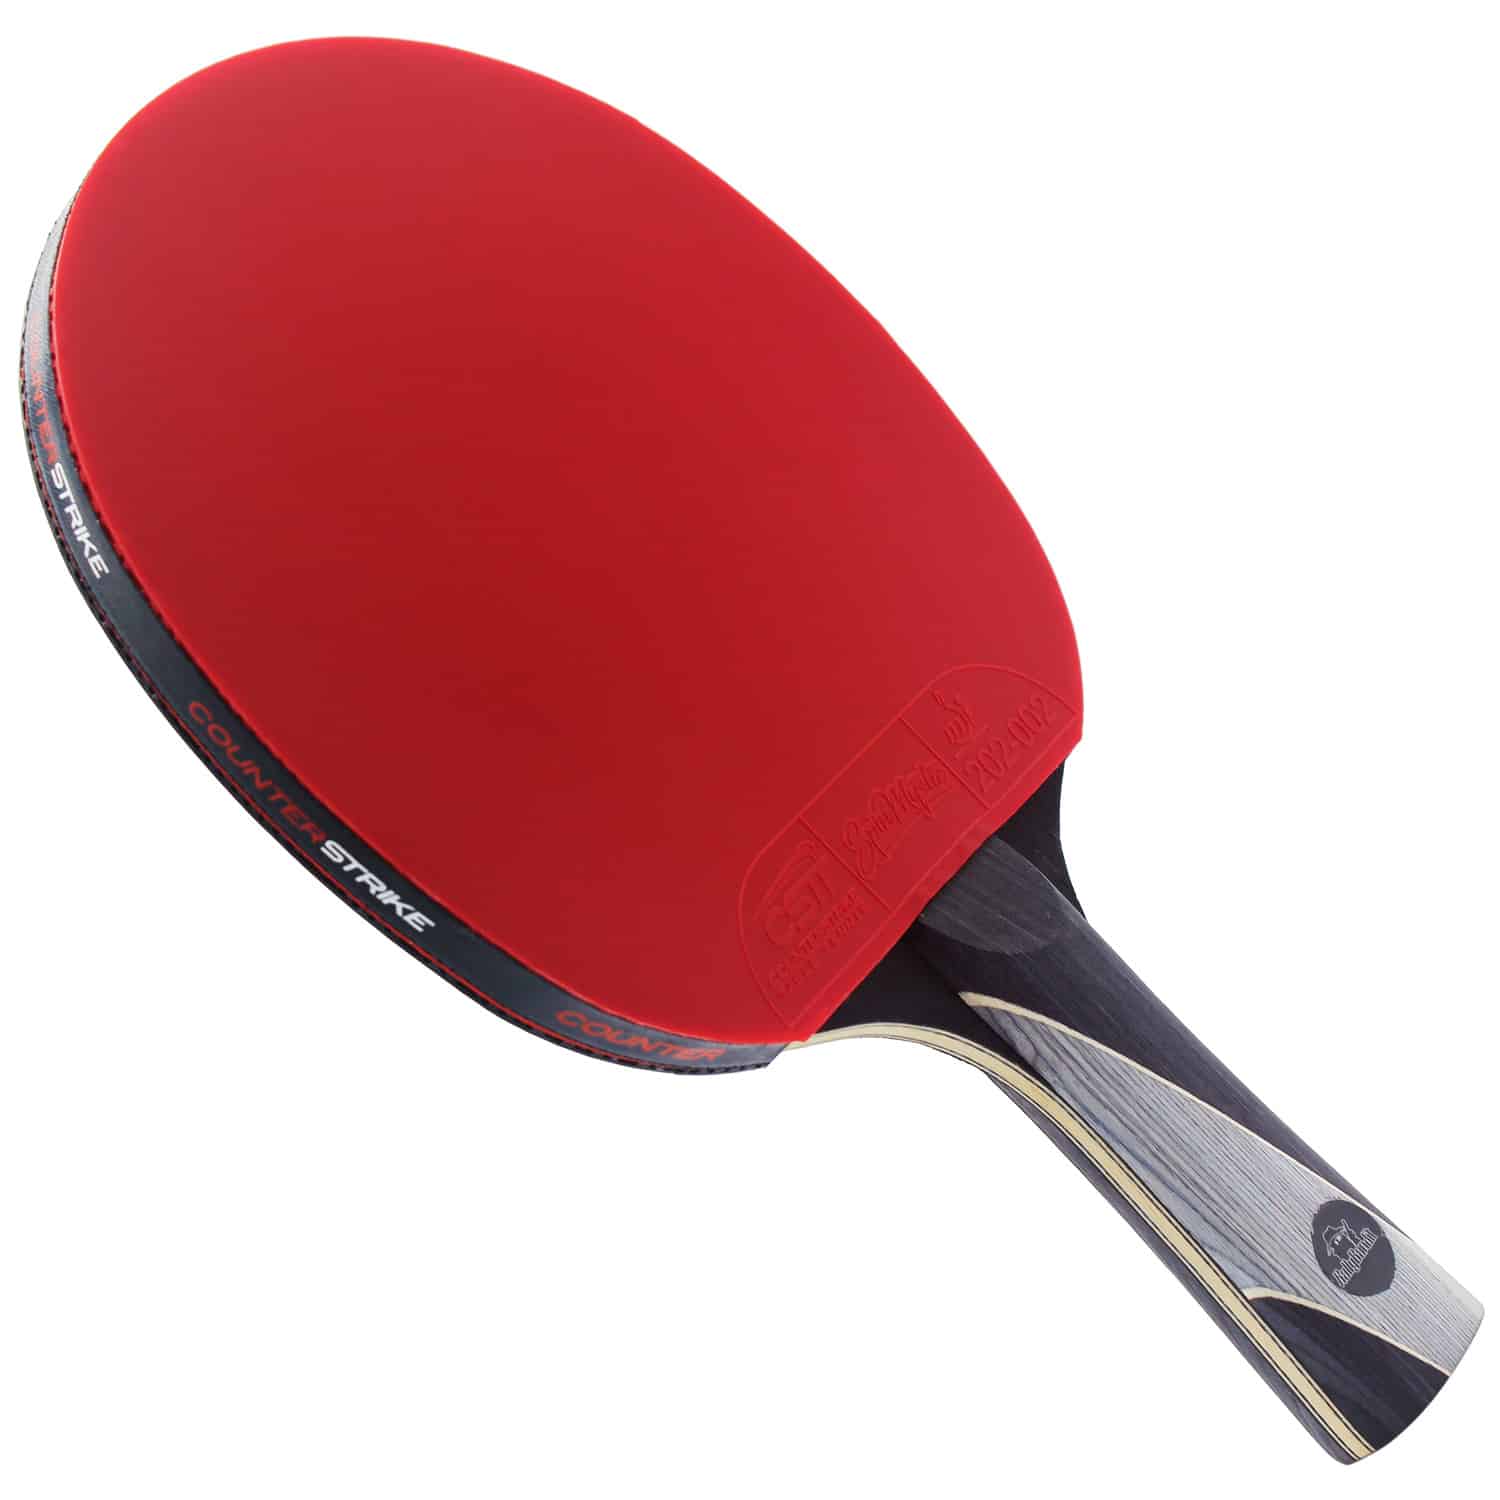 ITTF Approved Professional Table Tennis Paddle | Pro Ping Pong Paddle Carbon Table Tennis Paddle Includes Hard Case & 6 Balls Tournament Legal Rally Bandit Paddle Bundle 